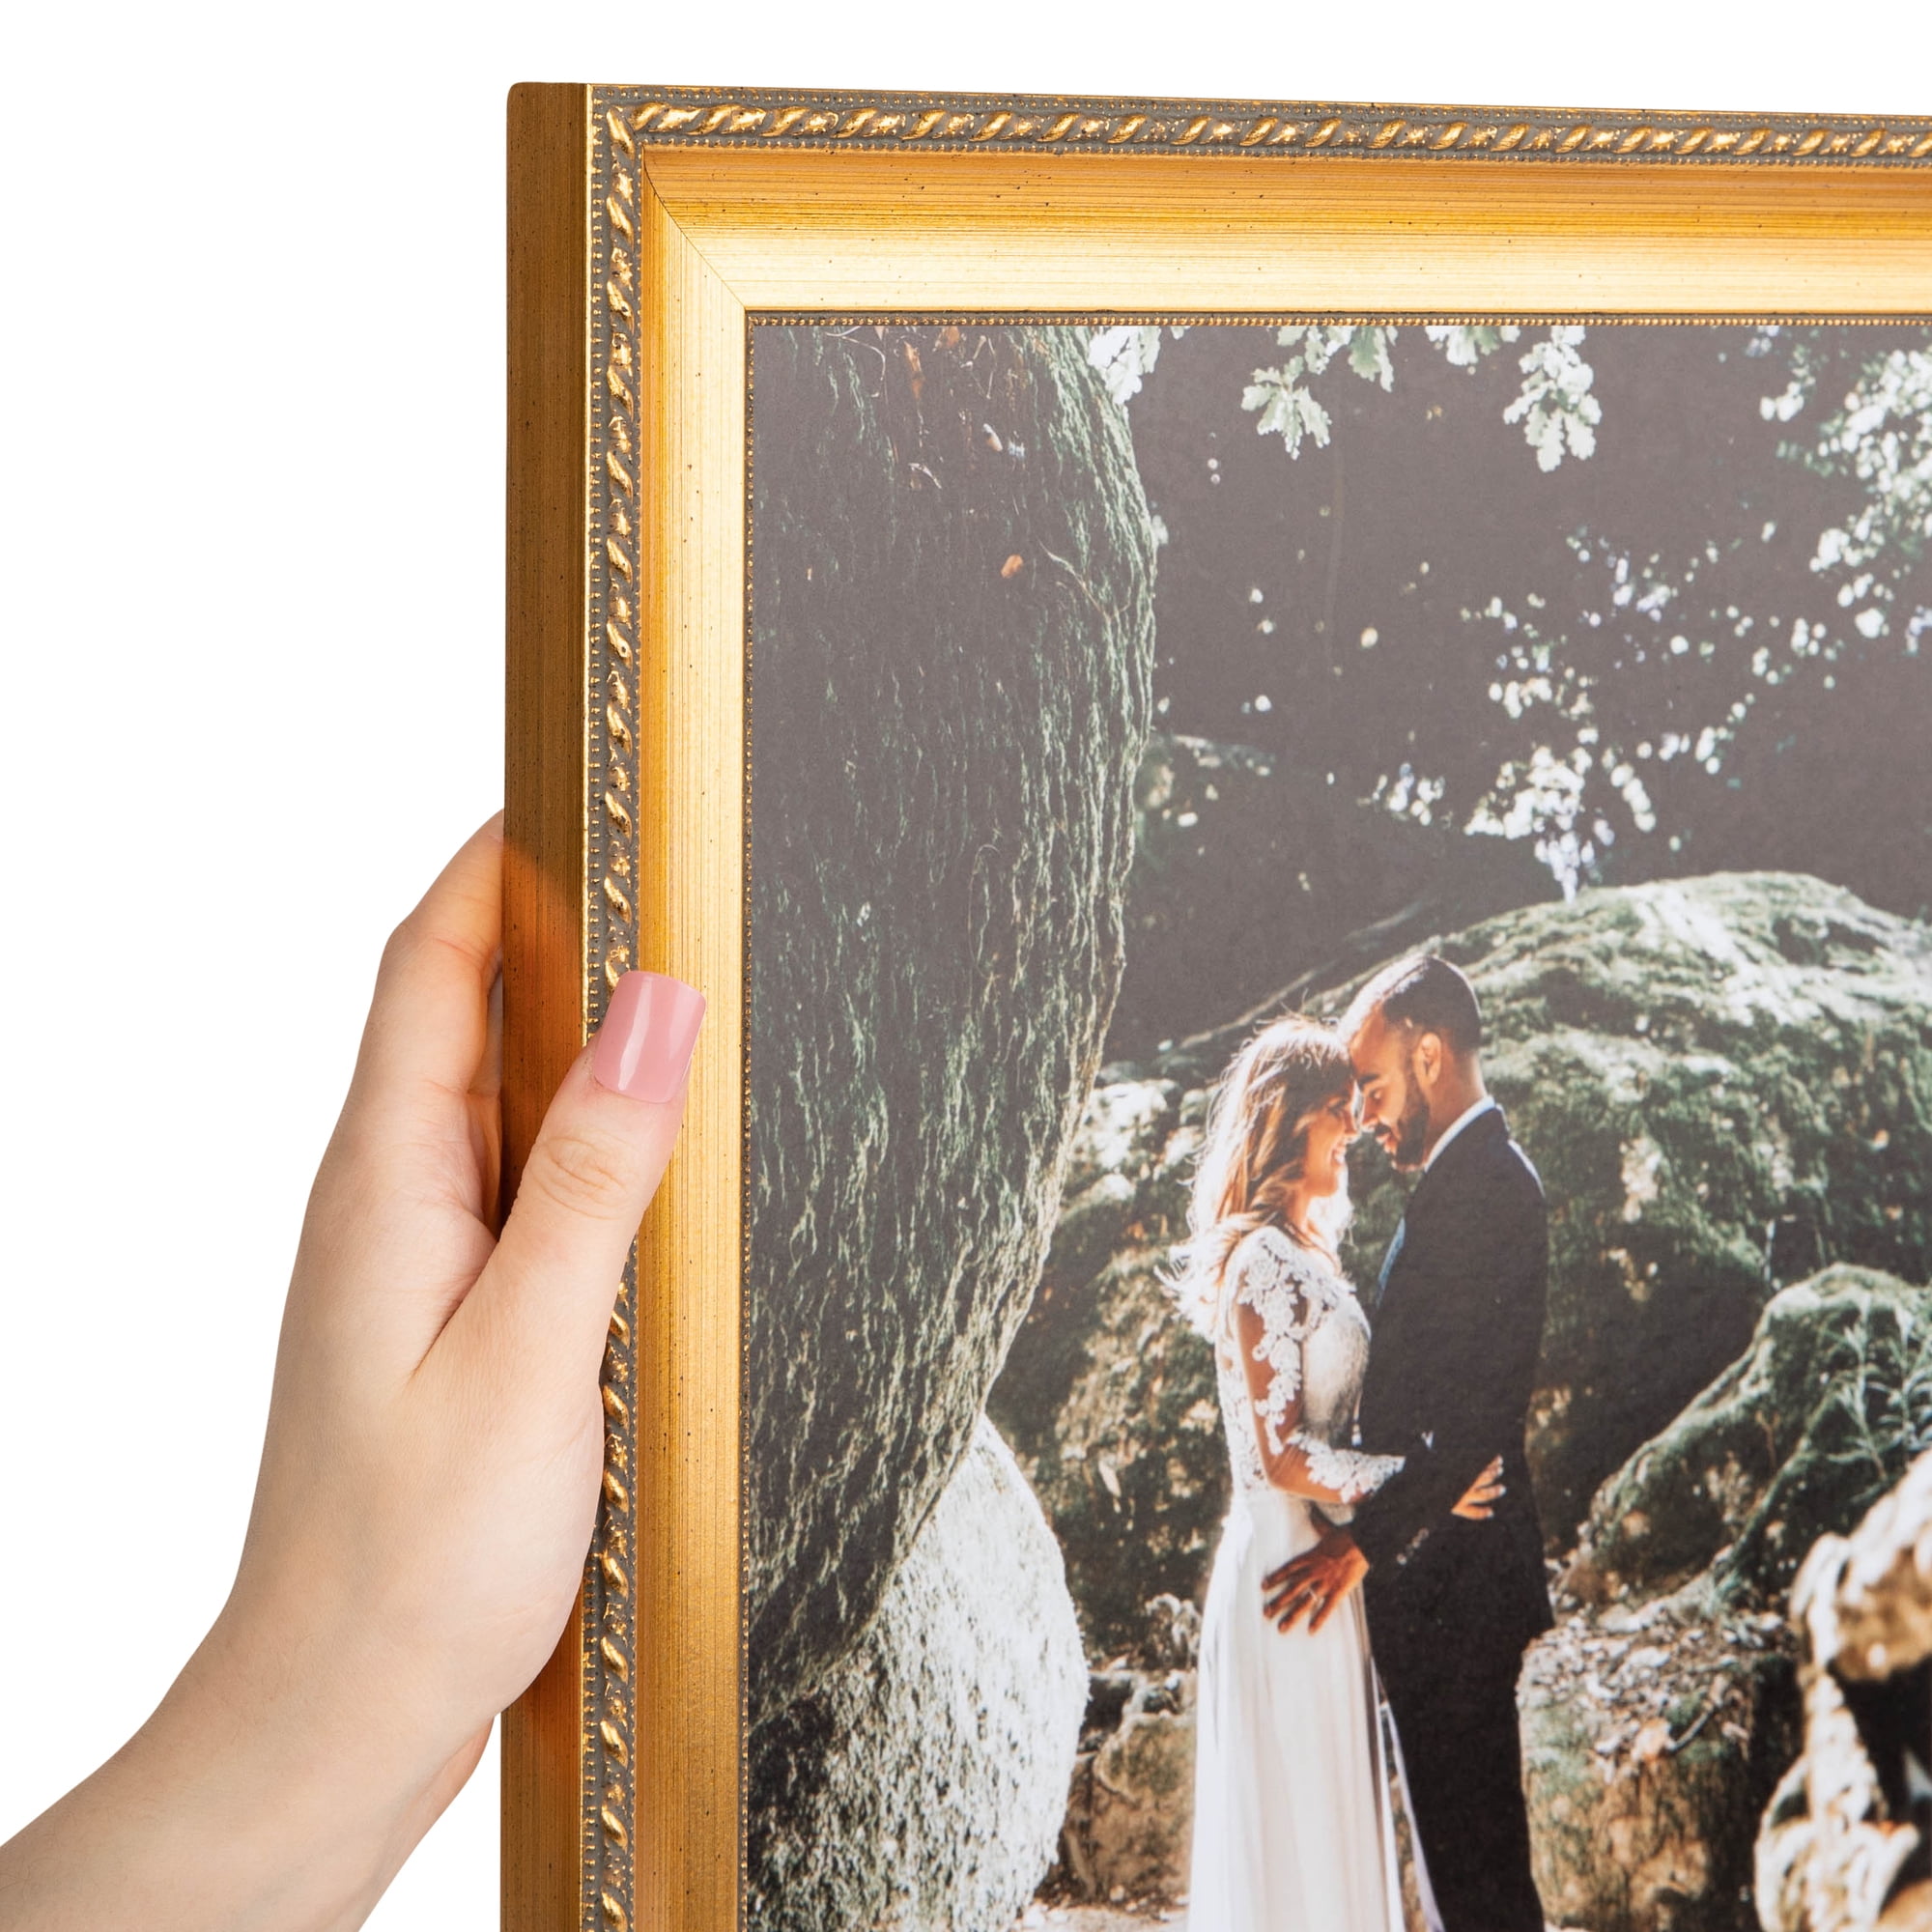 ArtToFrames 30x30 inch Gold Picture Frame, This 1.25 Custom Wood Poster Frame Is Gold Foil on Pine, for Your Art or Photos, 2WOM0066-81375-YGLD